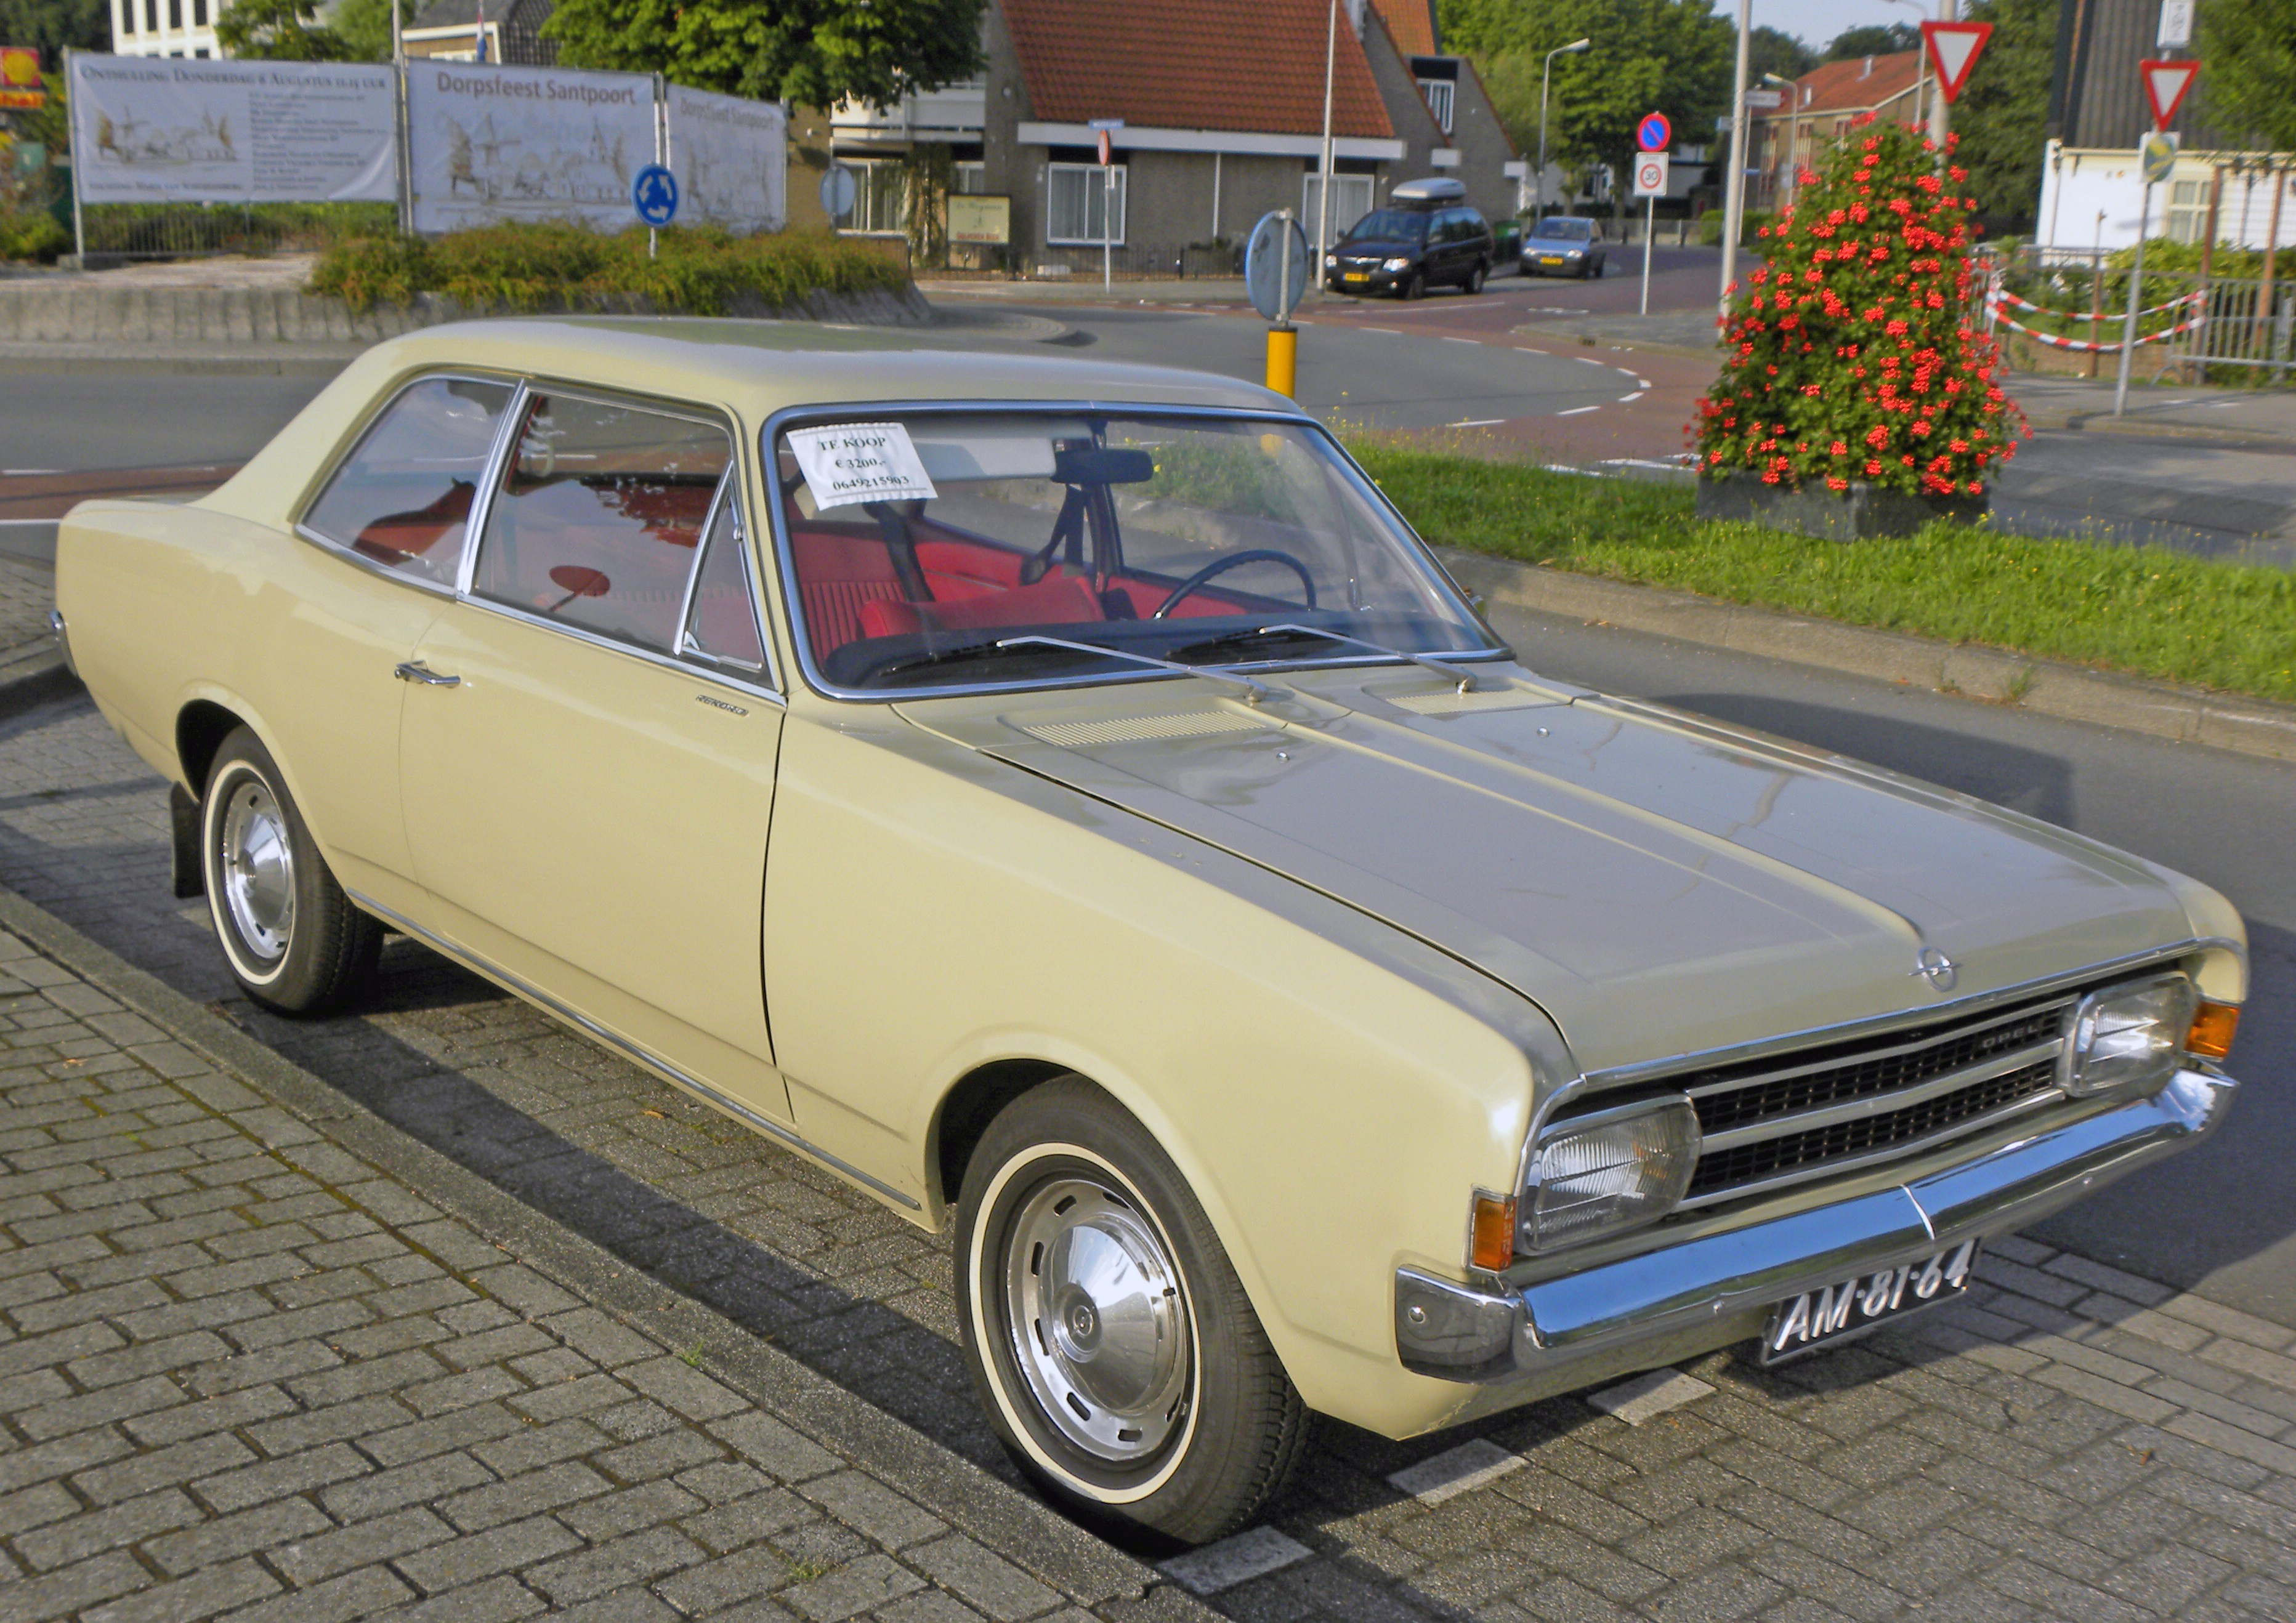 1971 Opel Rekord 1900 Coupe | Flickr - Photo Sharing!